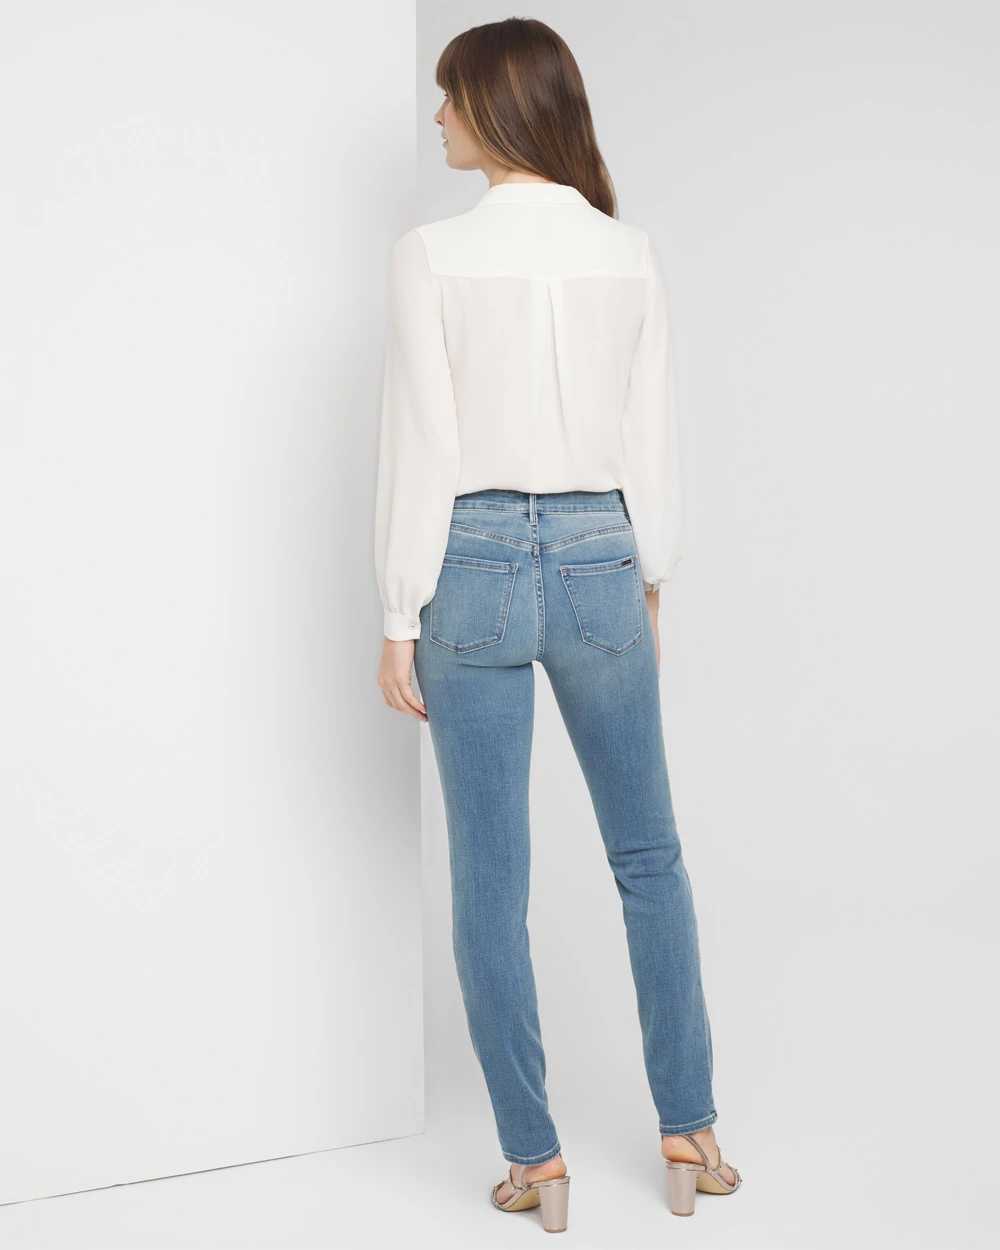 Mid-Rise Everyday Soft Denim  Slim Jeans click to view larger image.